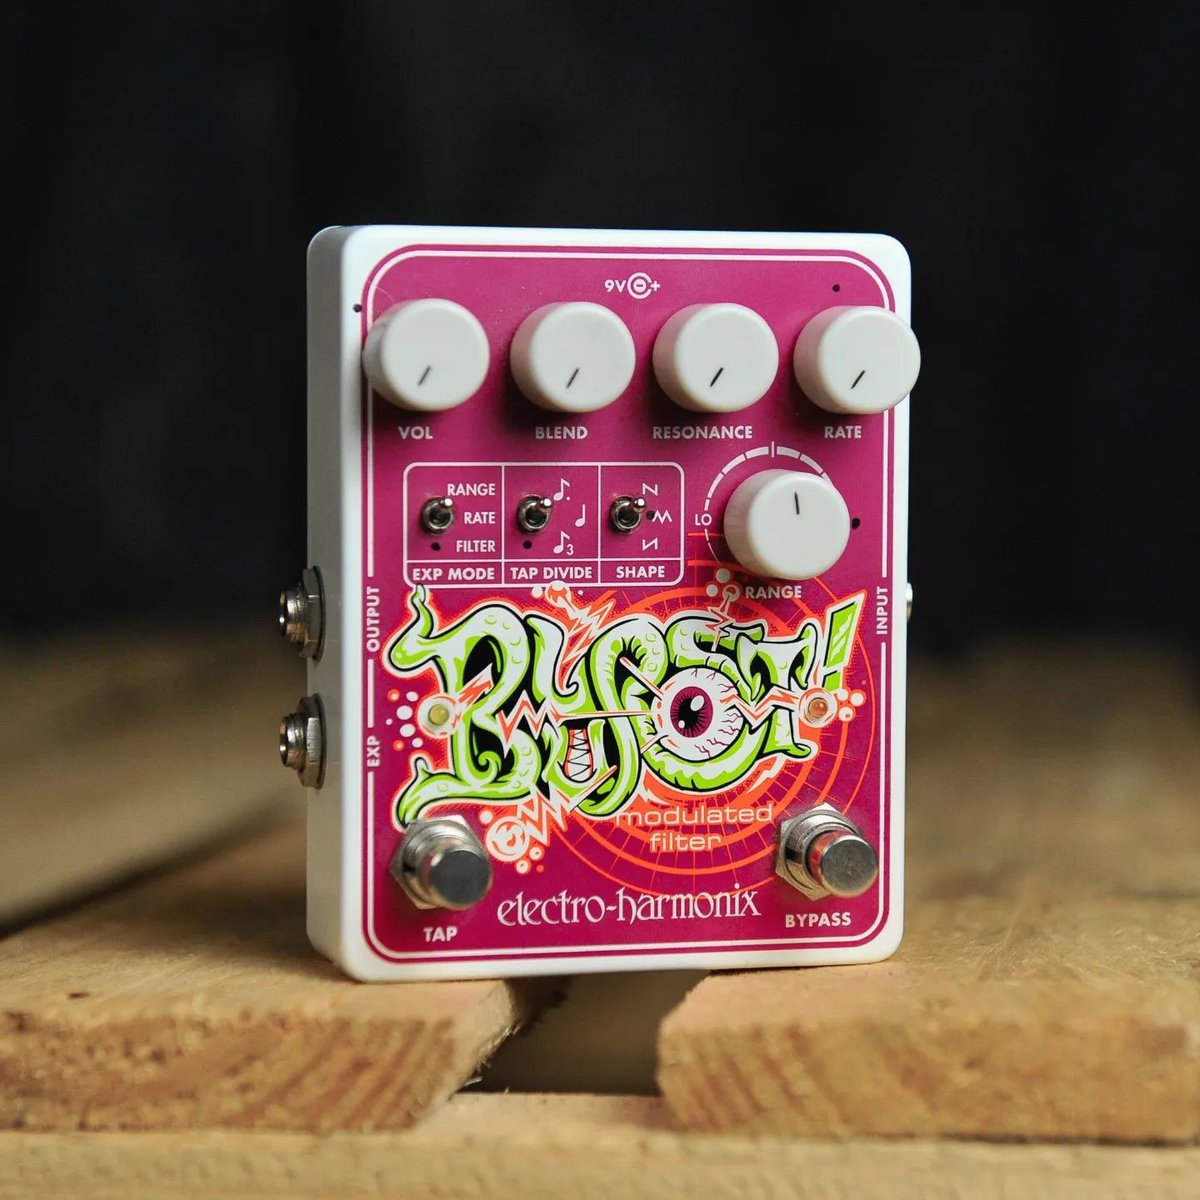 Let the EHX Blurst Modulated Filter morph and bend you tone to experience the Blurst of times! ehx.com/blurst 📷@theguitarfactory #ehx #guitarpedals #guitargear #guitareffects #electroharmonix